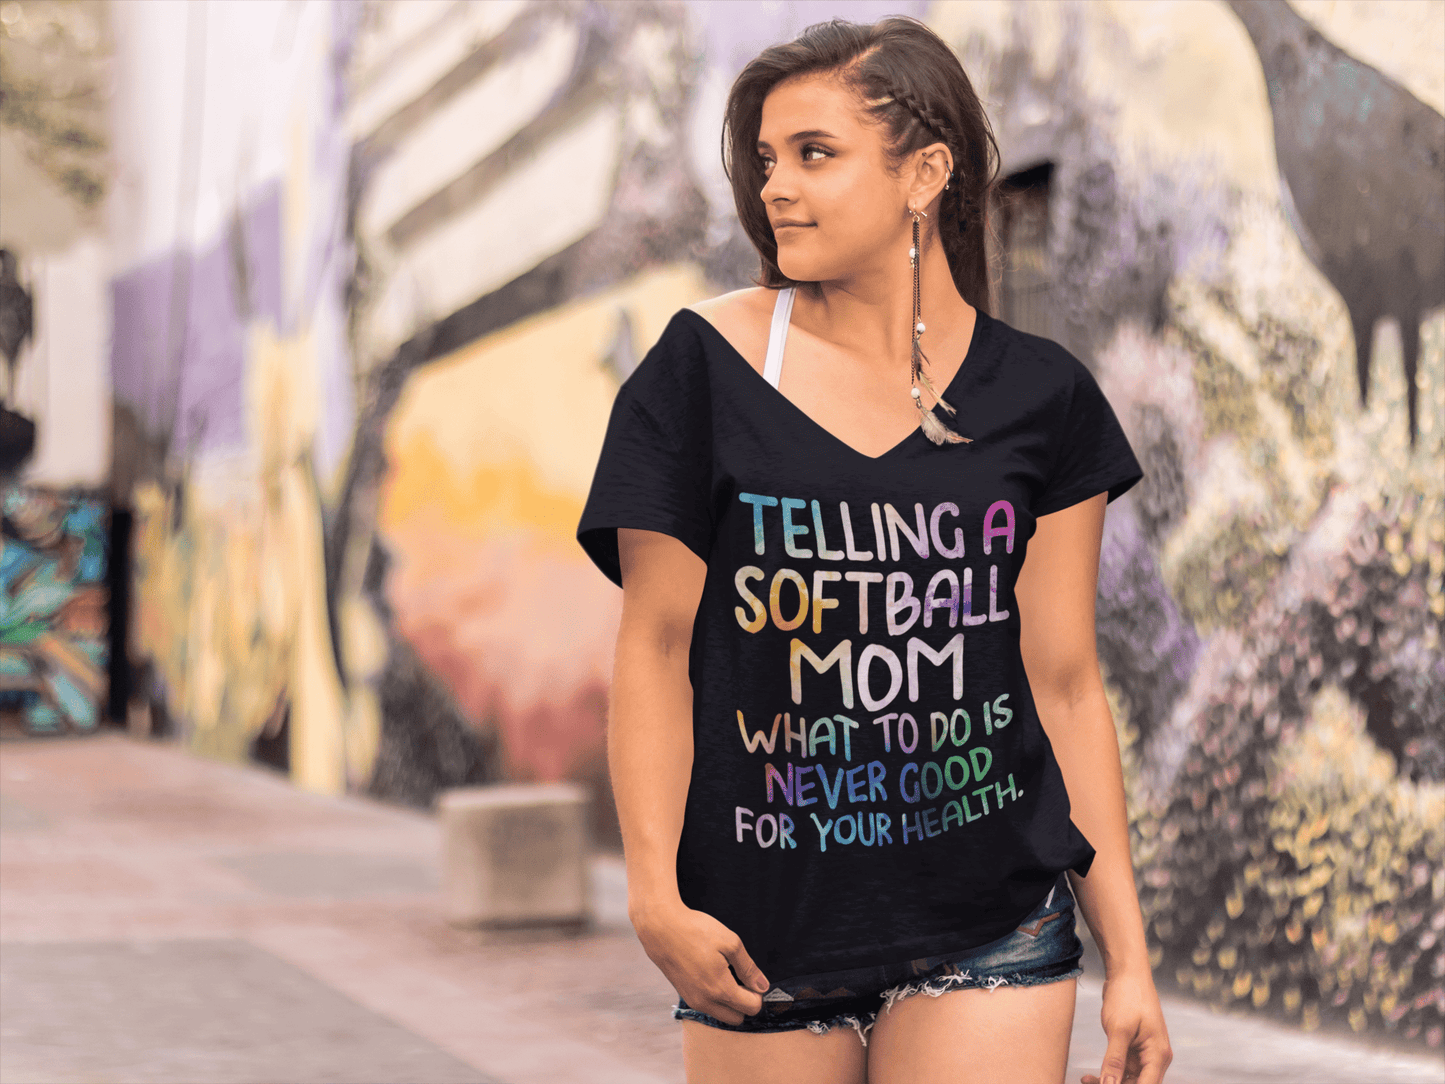 ULTRABASIC Women's V-Neck T-Shirt Telling a Softball Mom What To Do - Funny Quote